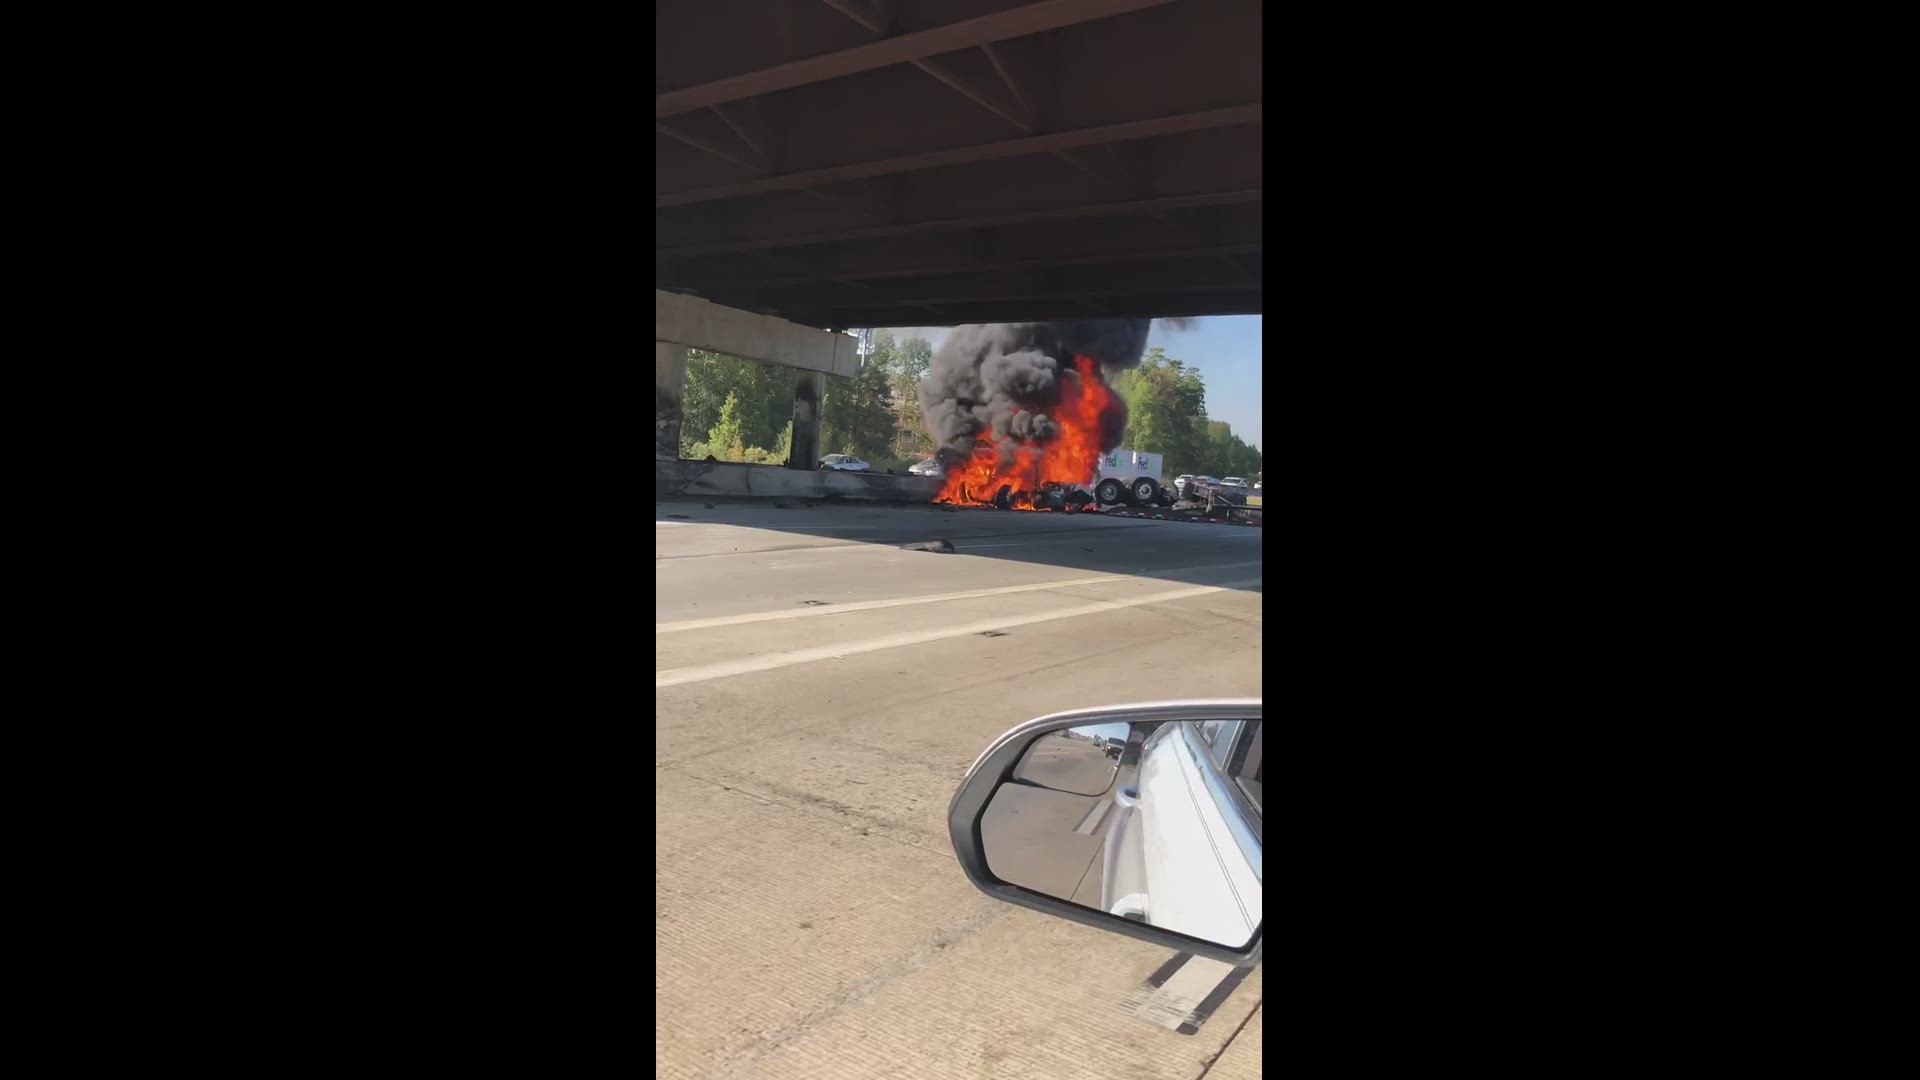 One person was killed in a fiery crash involving a tractor-trailer on I-485 near Northlake Mall Friday morning, Charlotte Fire said.